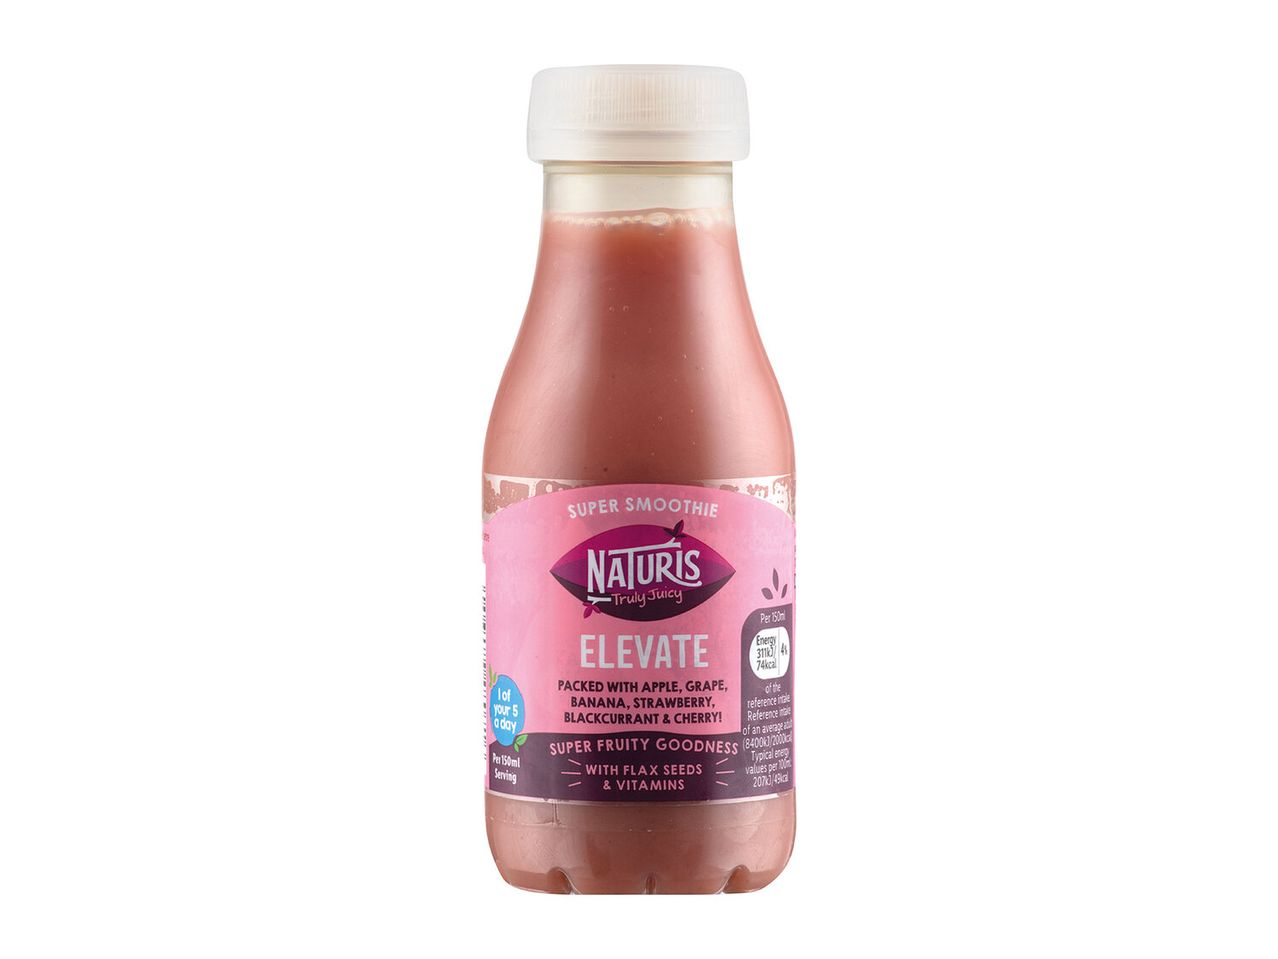 Go to full screen view: Naturis Super Smoothie Assorted Flavours 250ml Bottle - Image 2